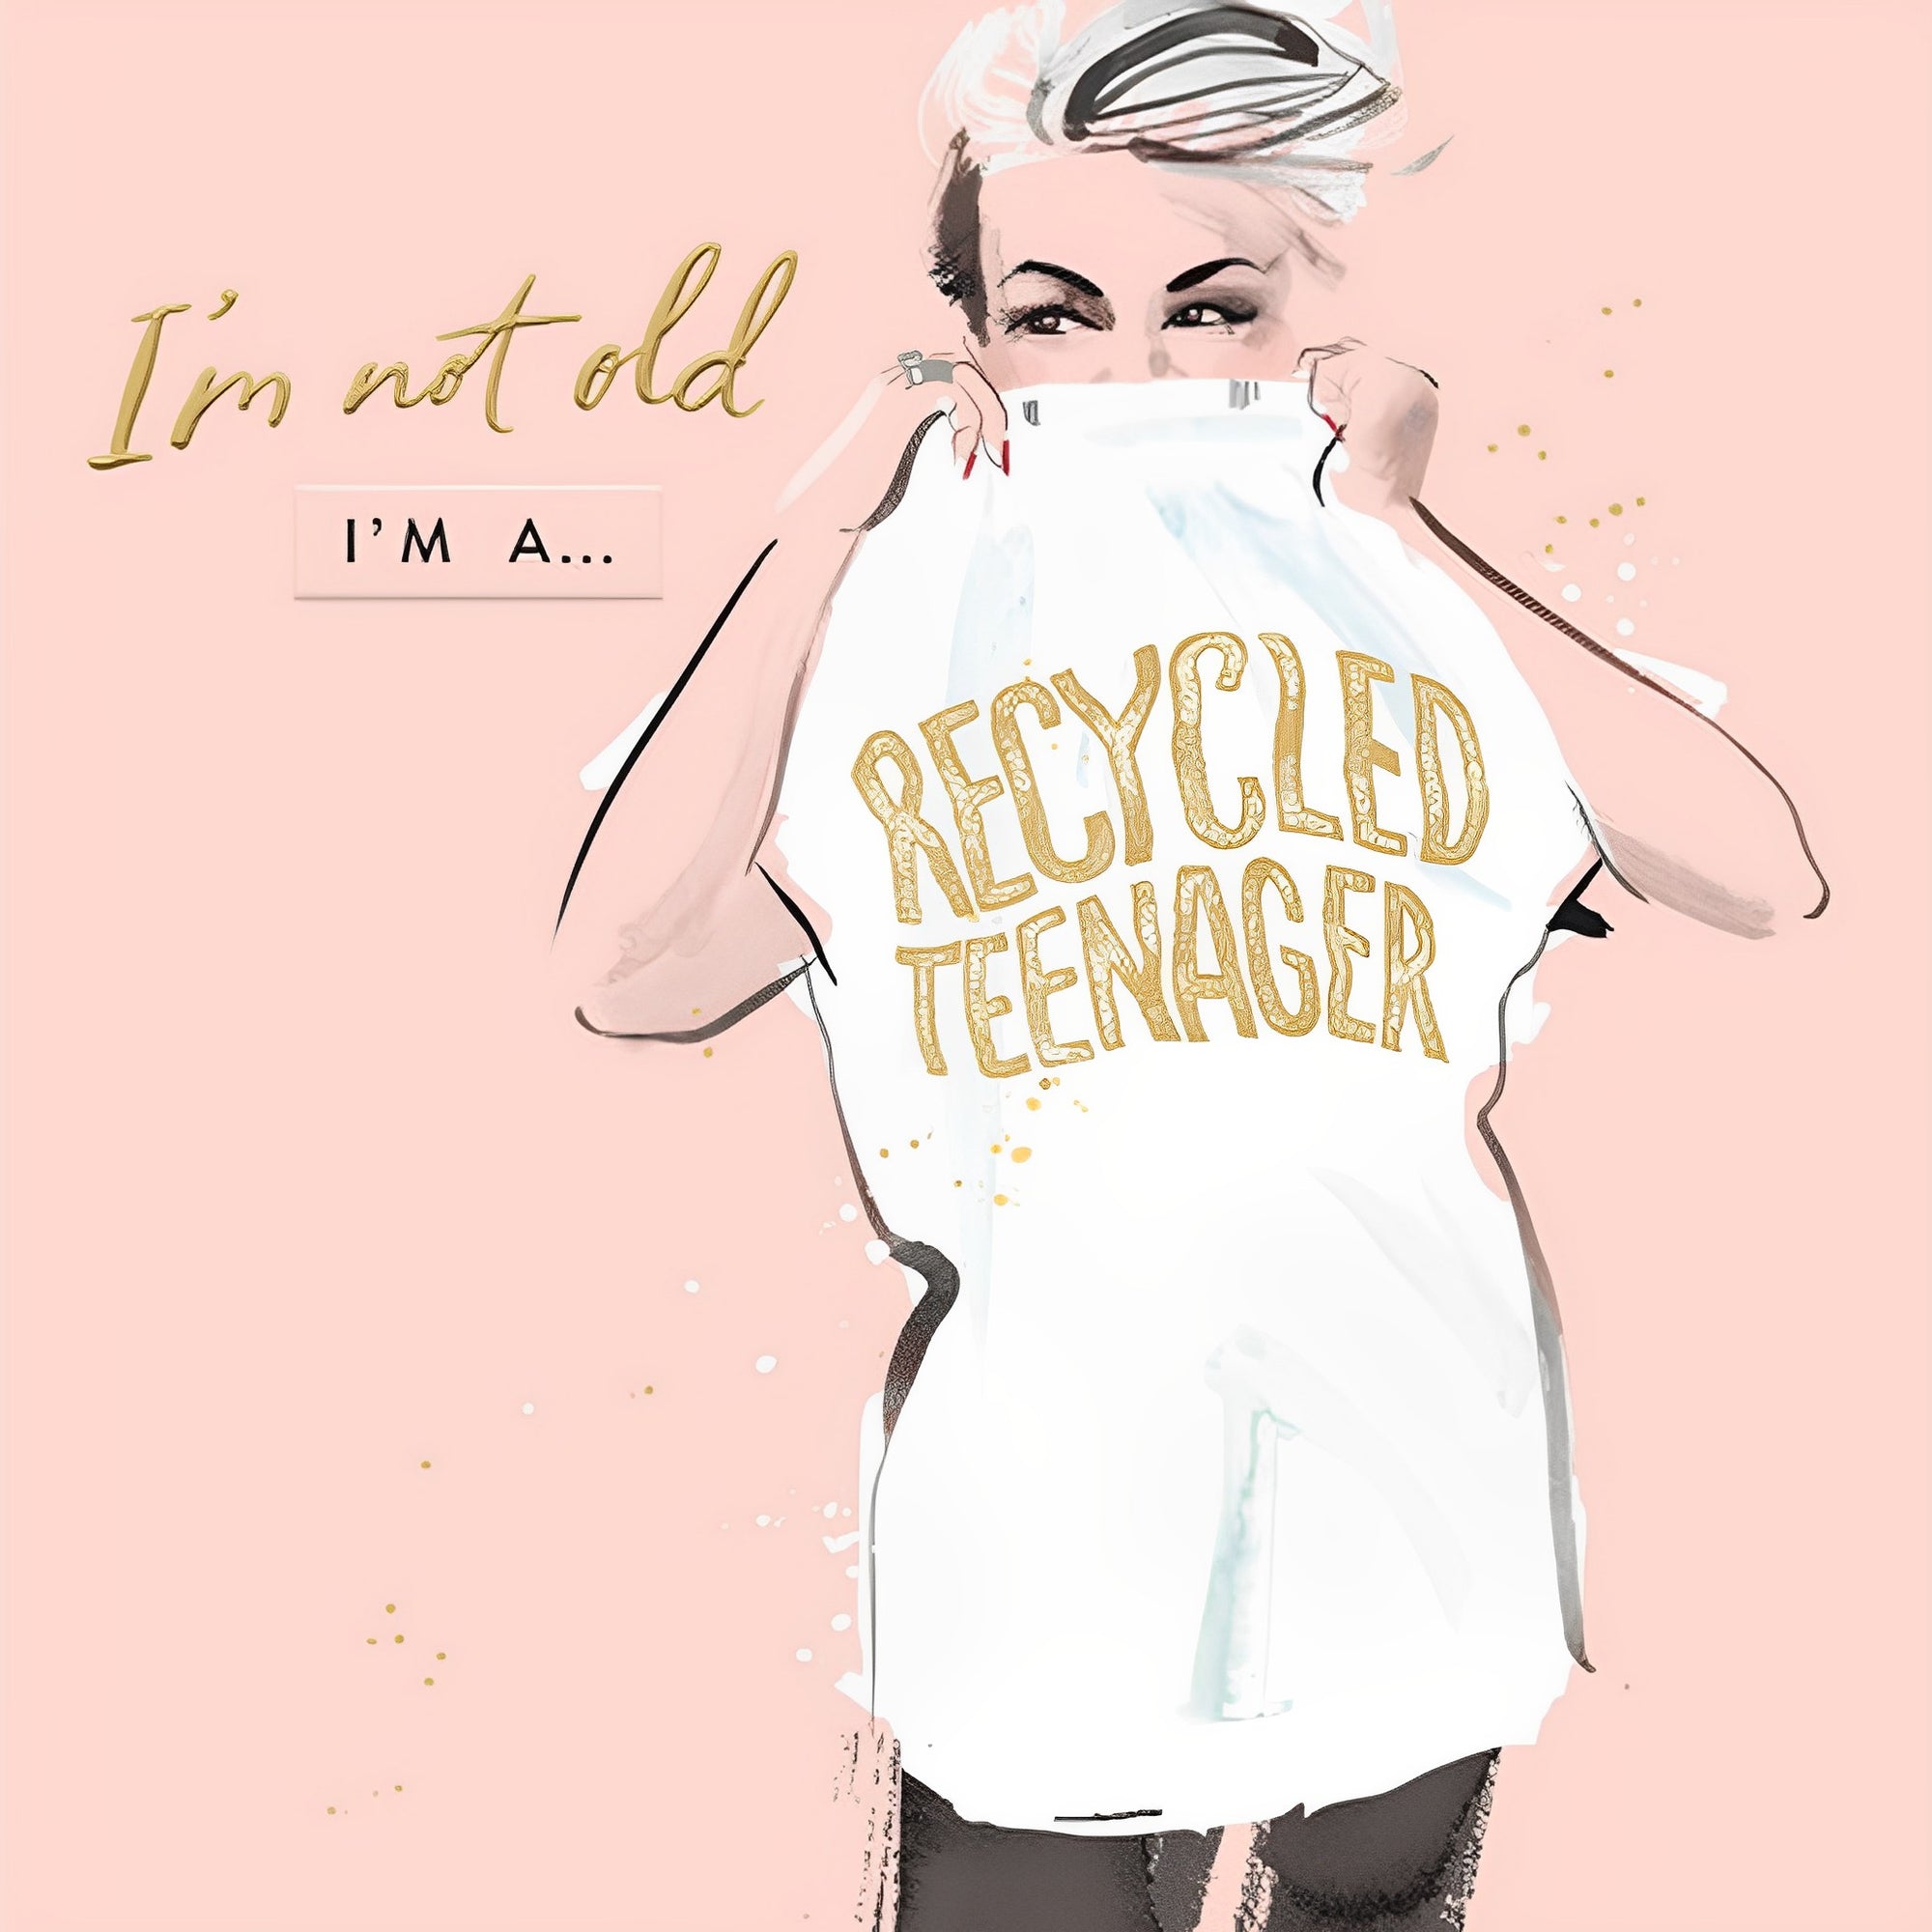 Recycled Teenager Funny Card from Penny Black